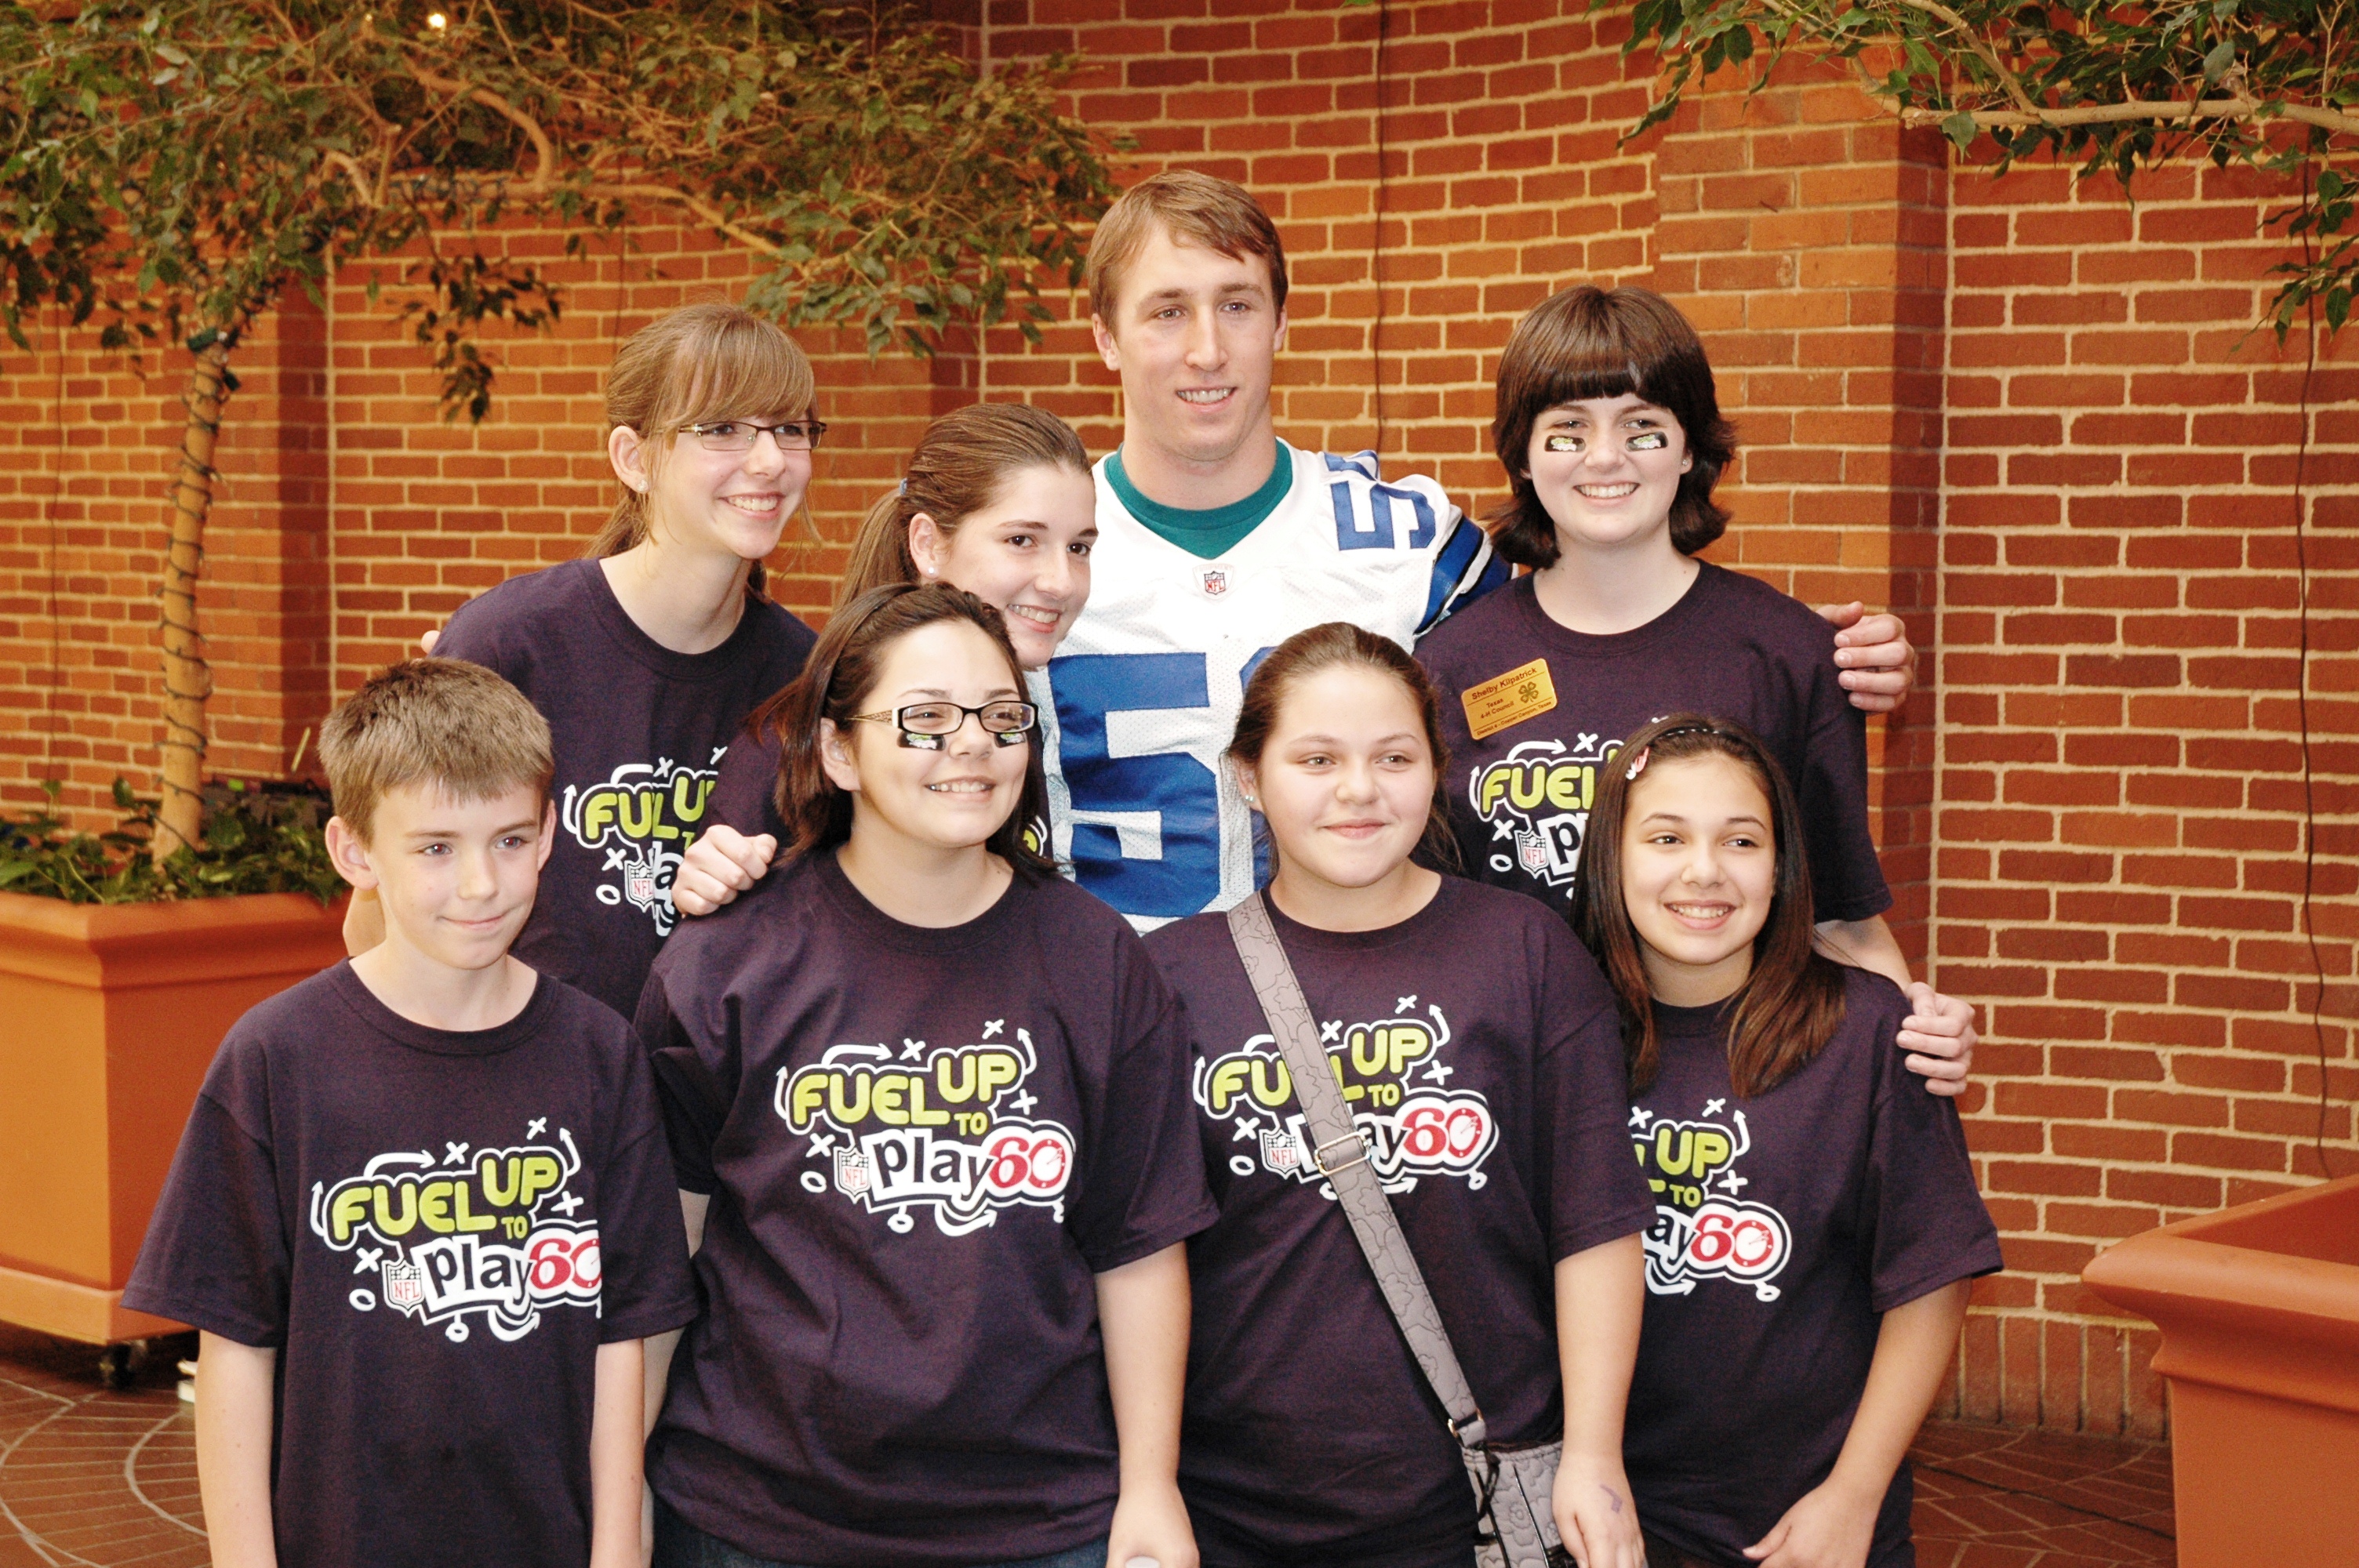 Dallas Cowboy linebacker encourages kids to eat healthy and stay active